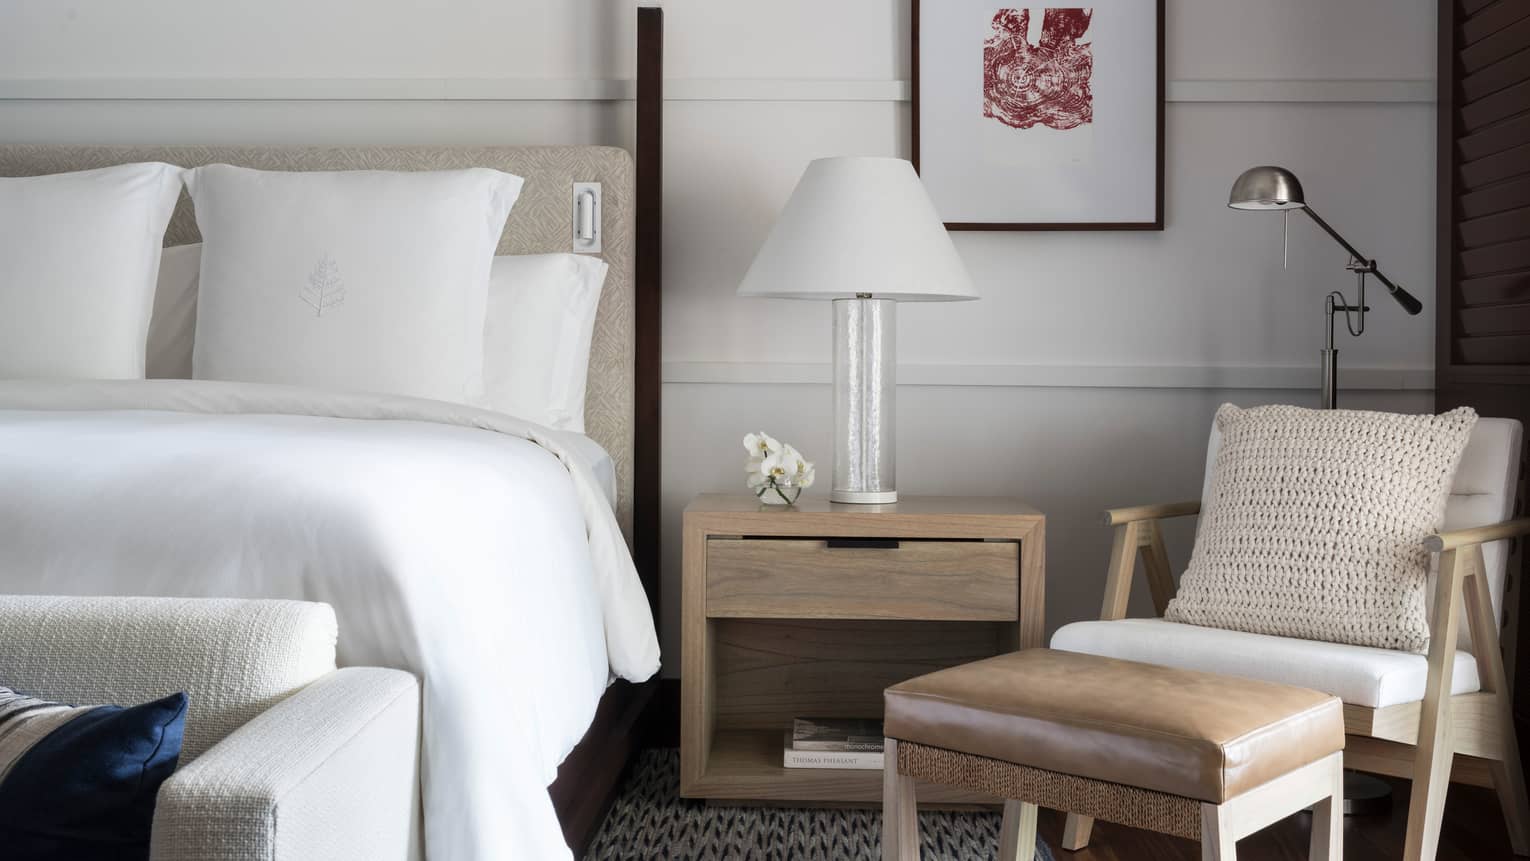 Close-up of white hotel bed, nightstand with white lamp, modern armchair and leather footstool